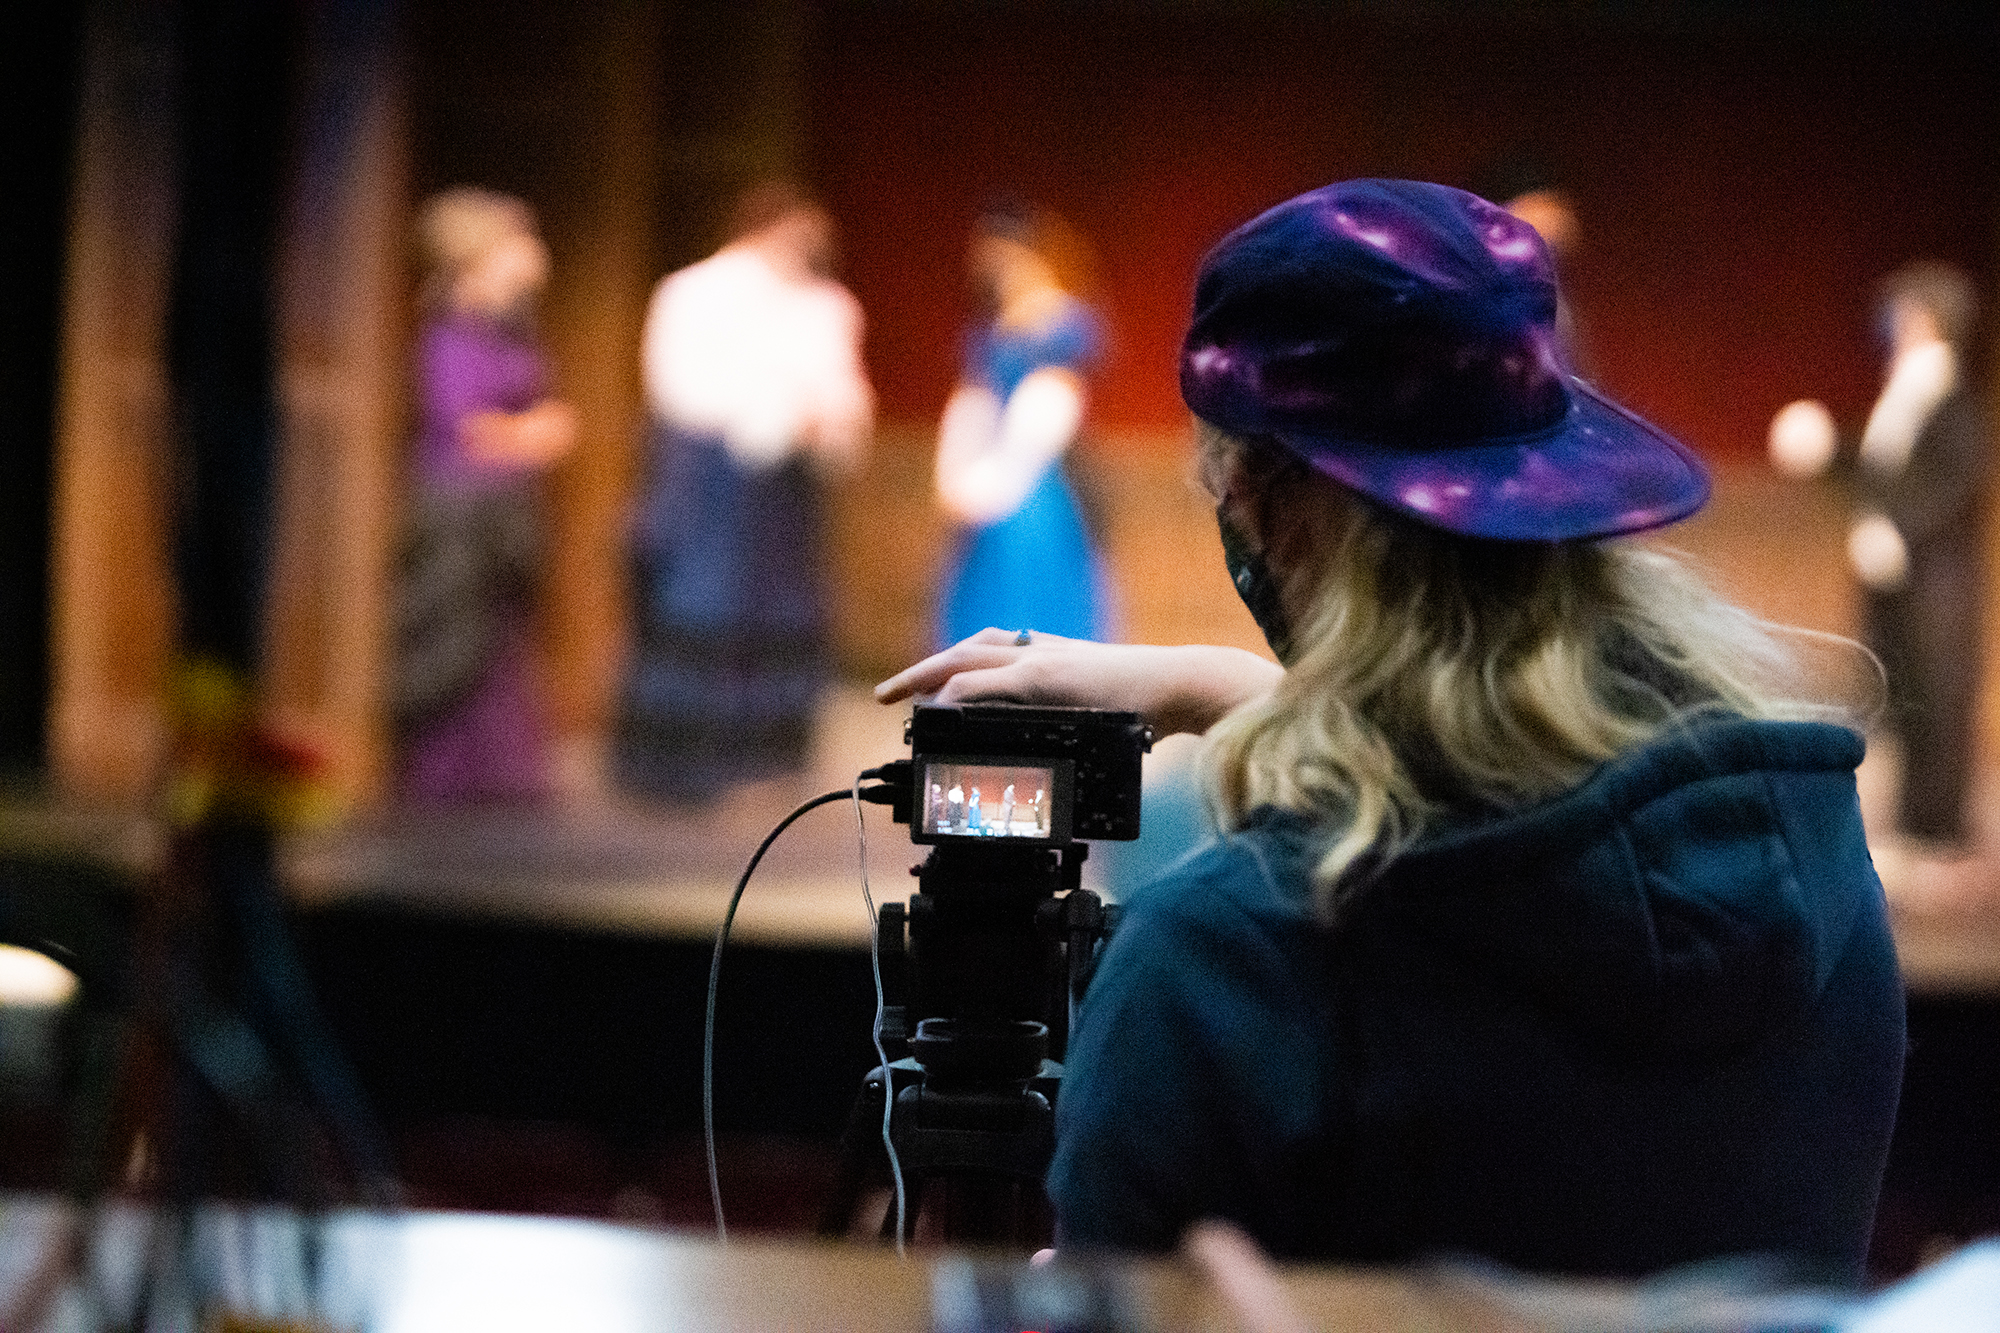 Filming shows at the Little Theatre